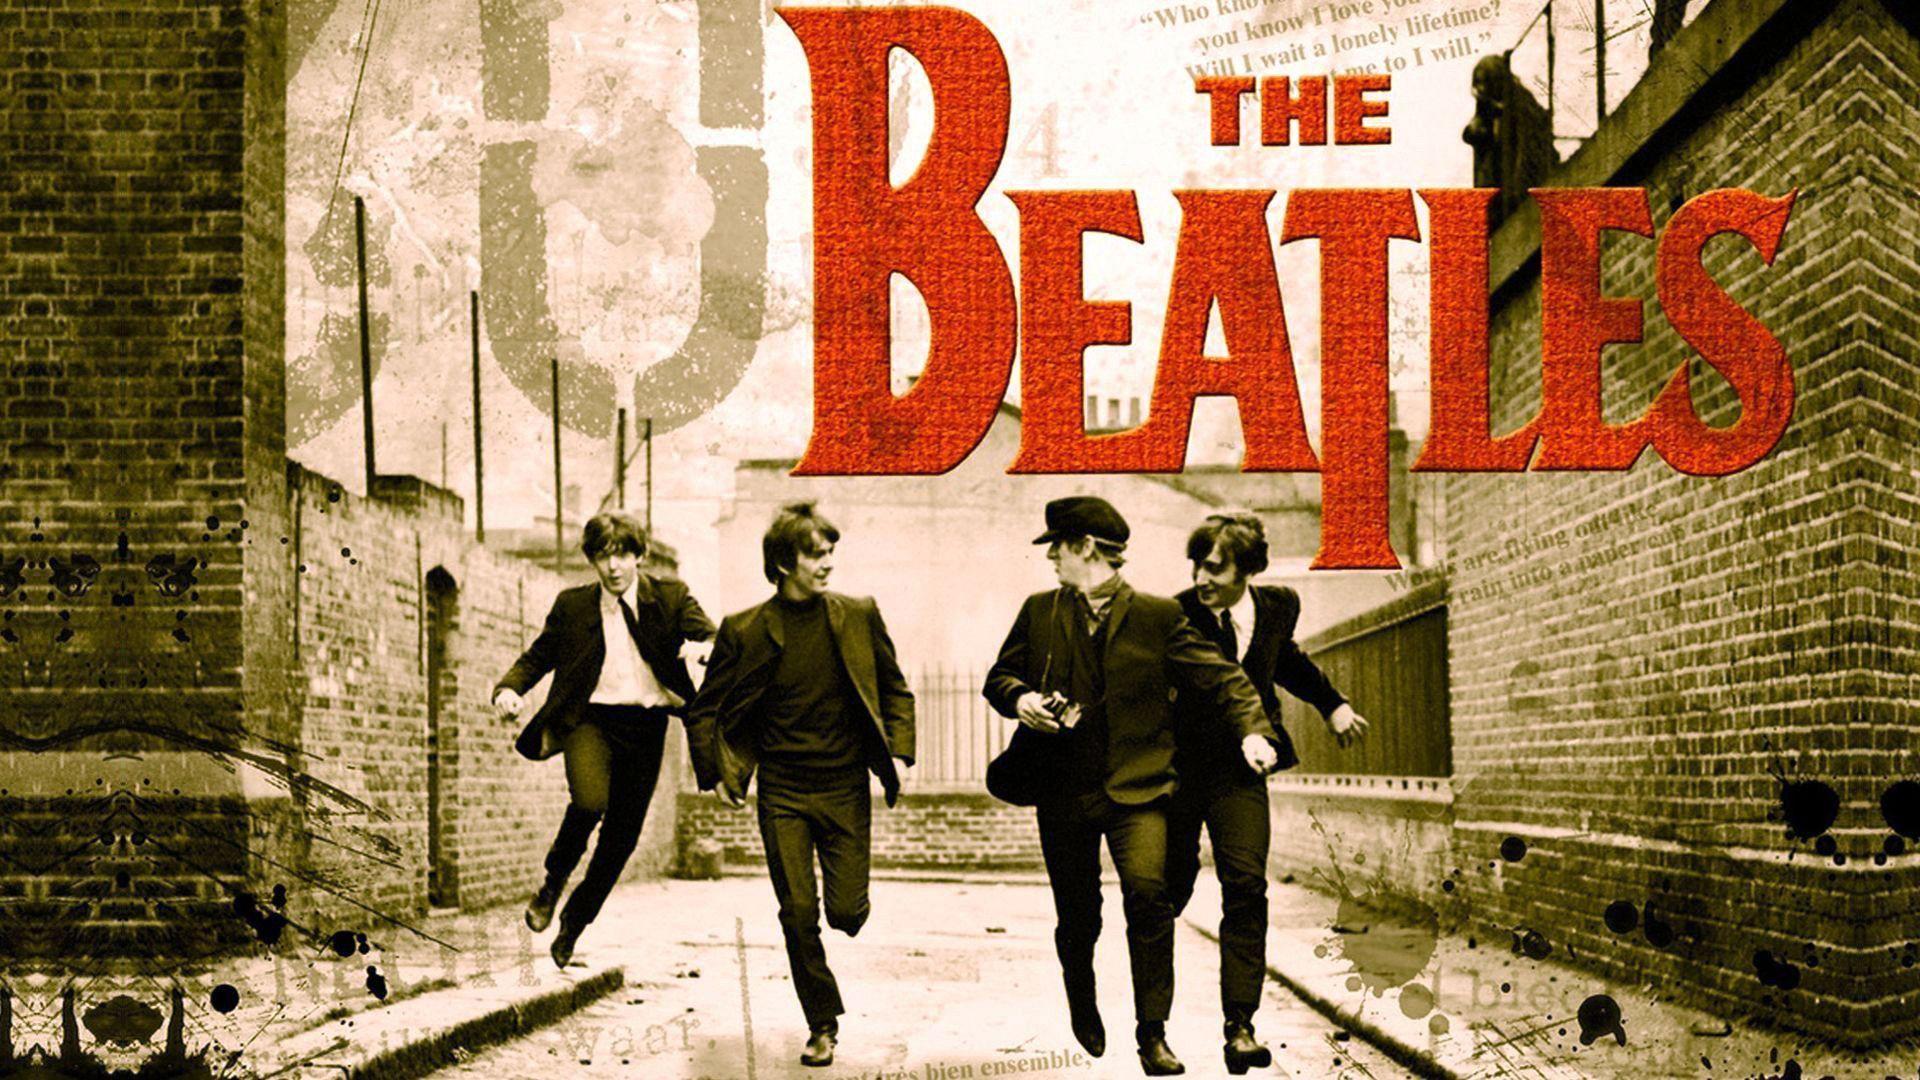 The Beatles Wallpaper. The Beatles Background